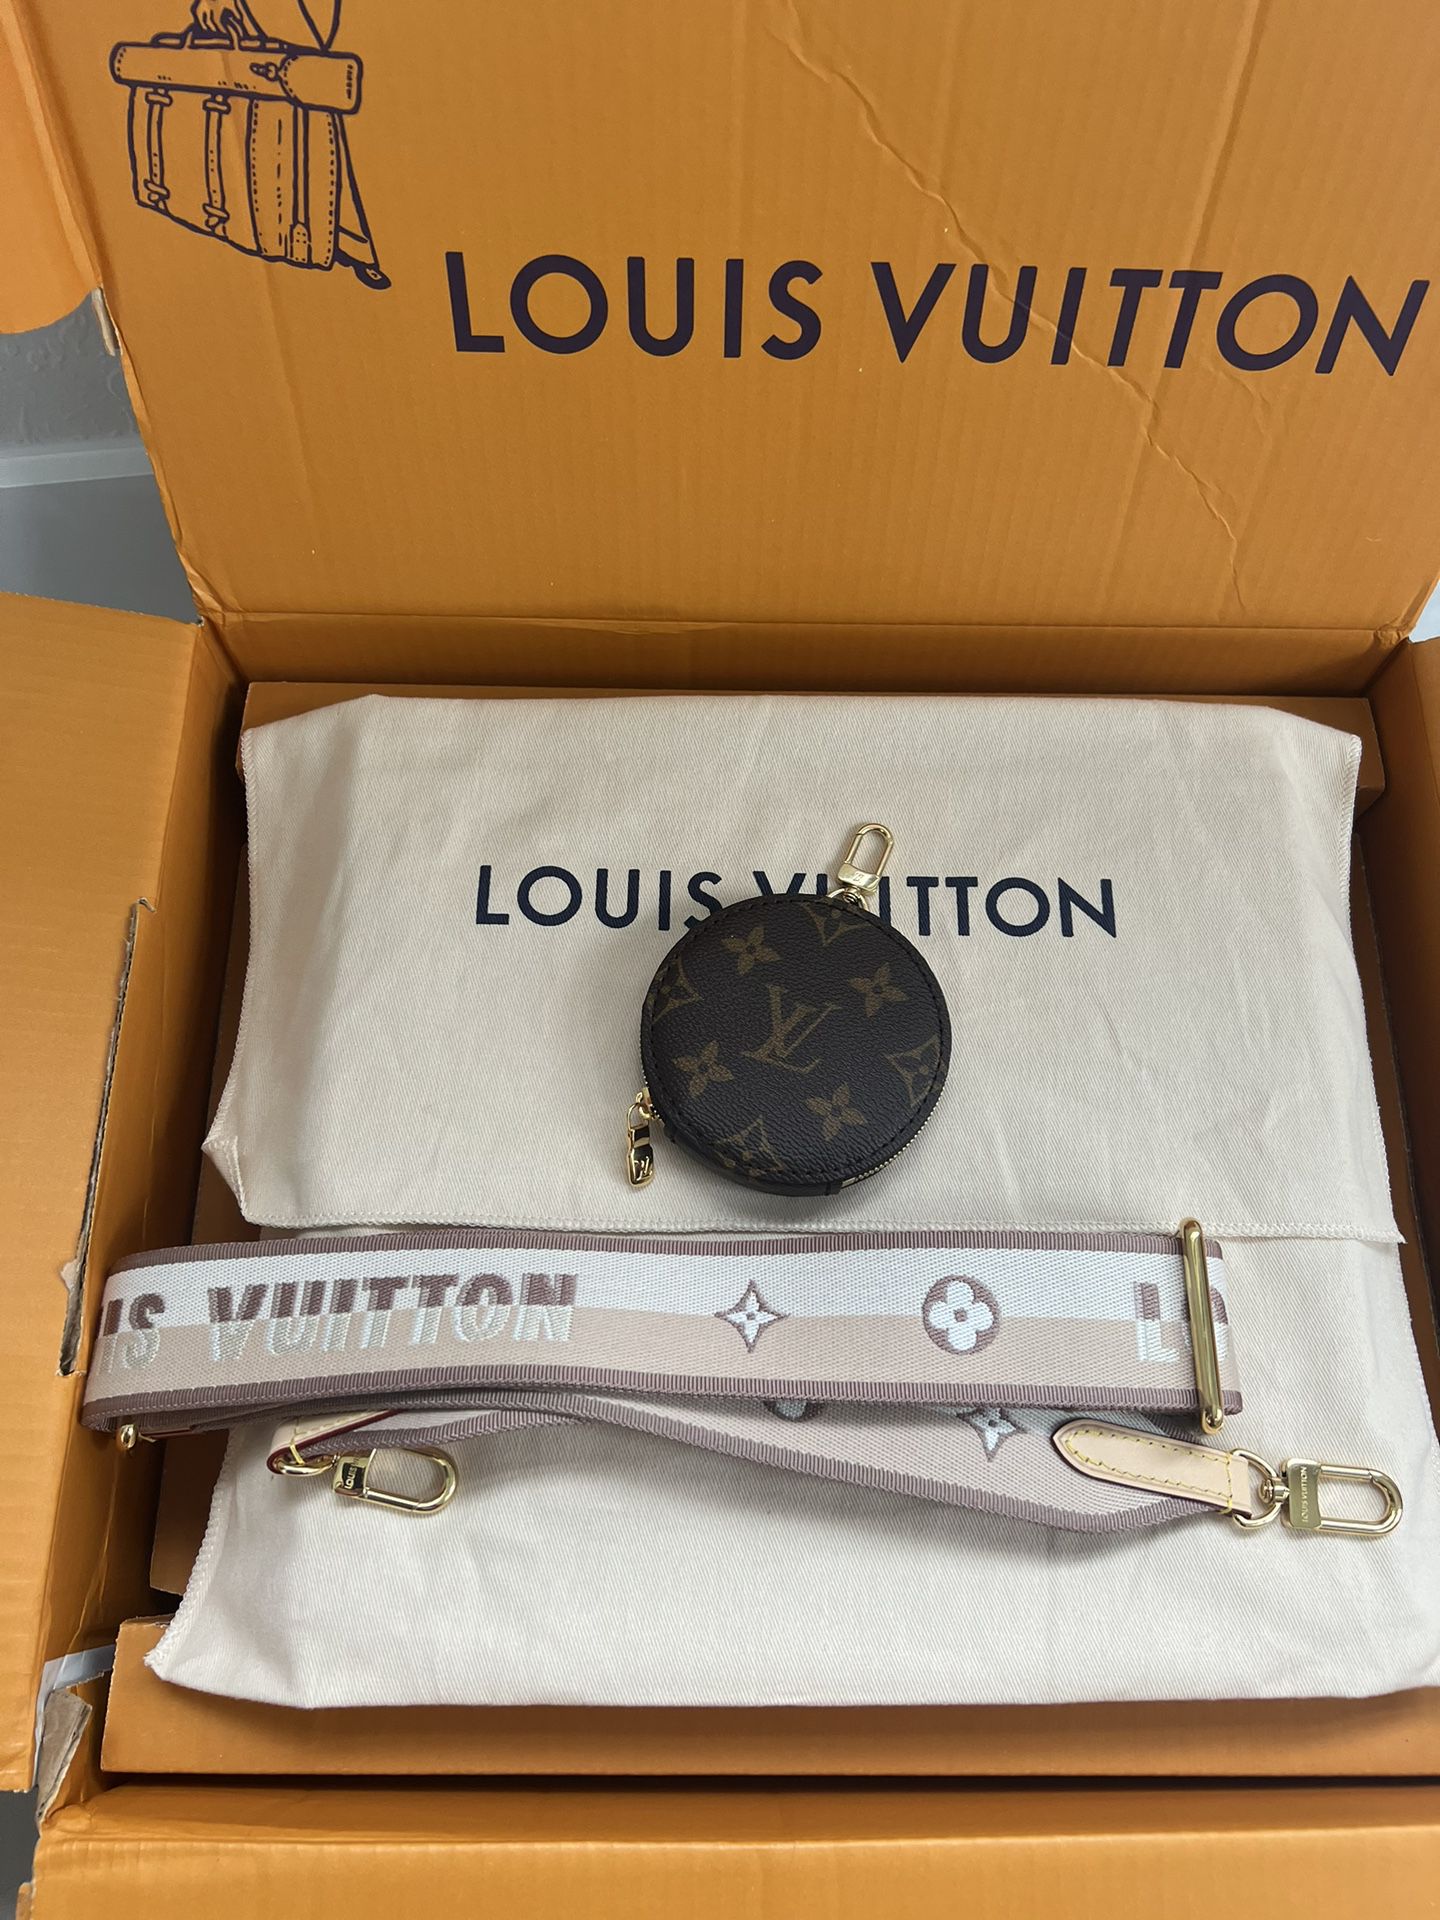 Mille Feux by Louis Vuitton for Sale in Pompano Beach, FL - OfferUp